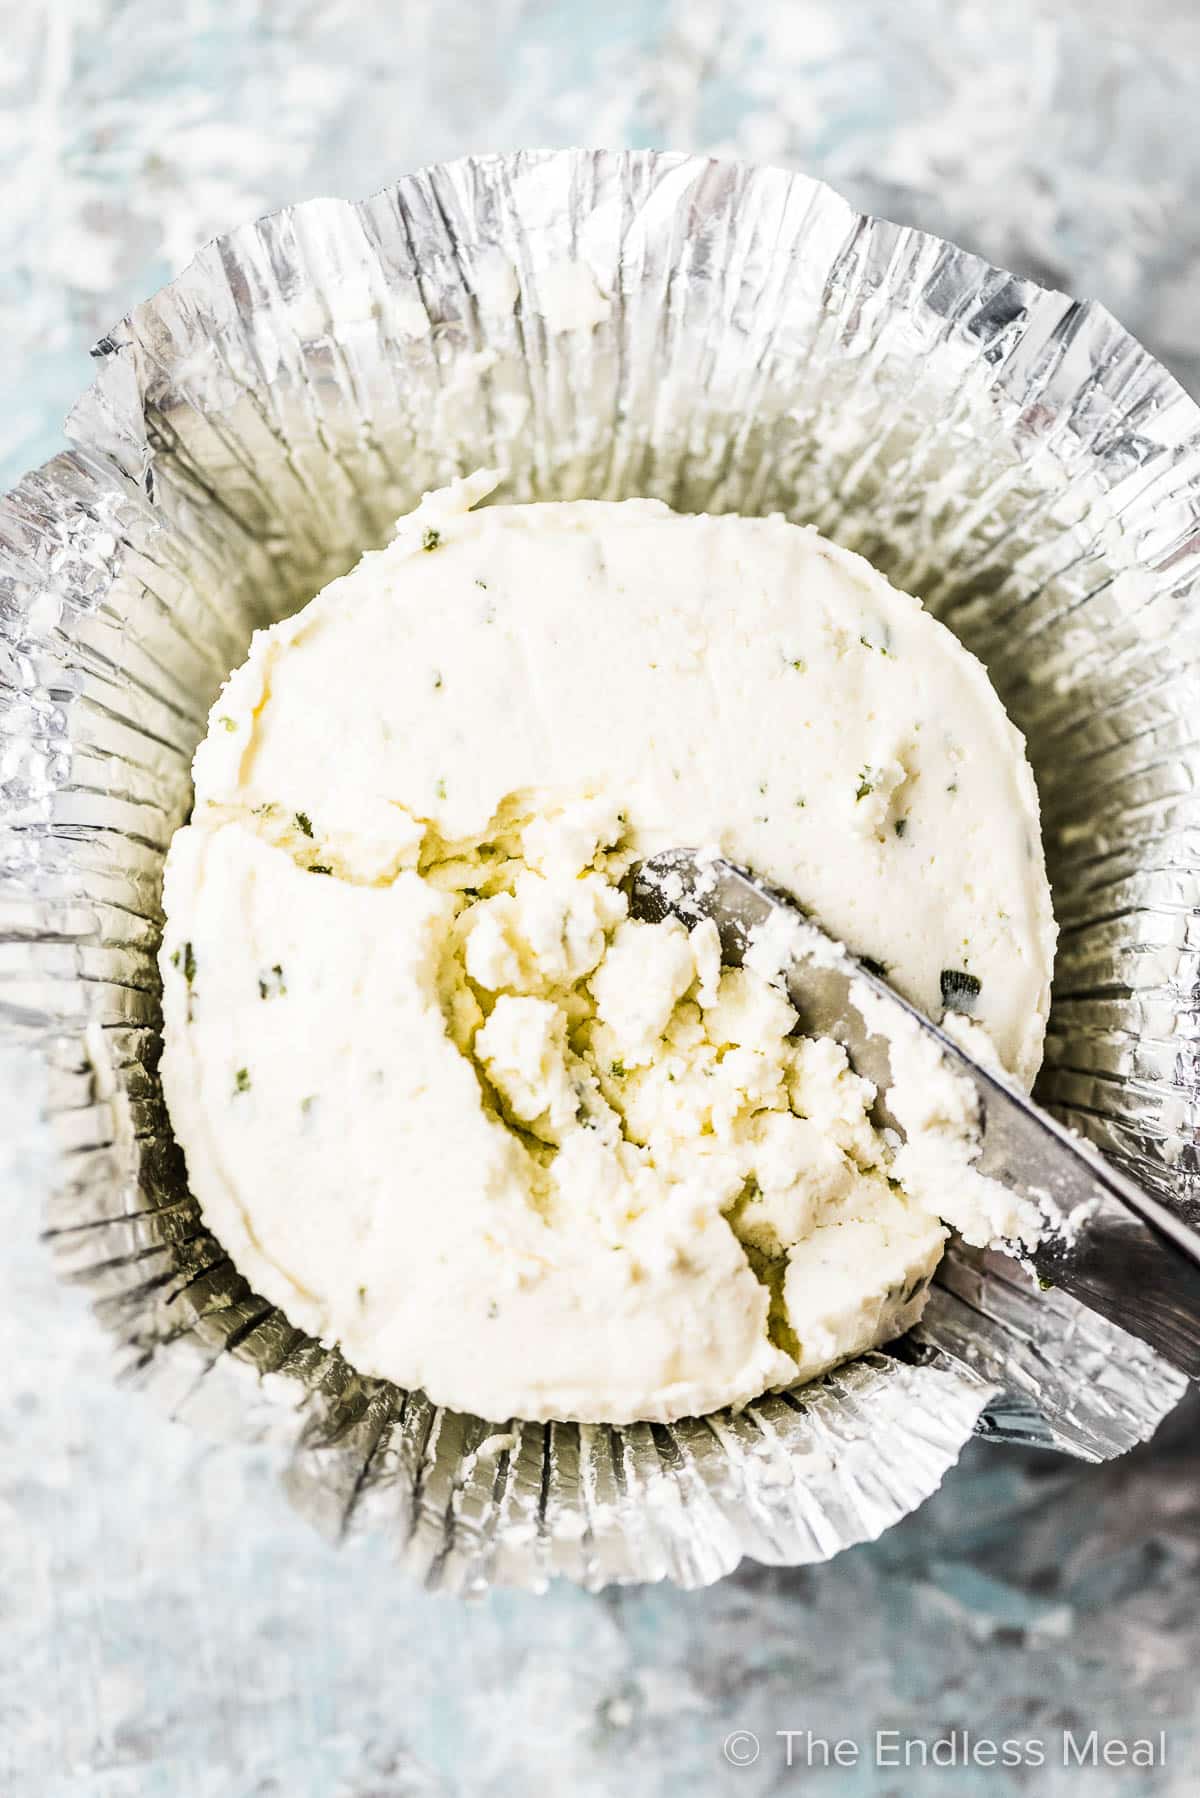 Boursin cheese with a knife in it.